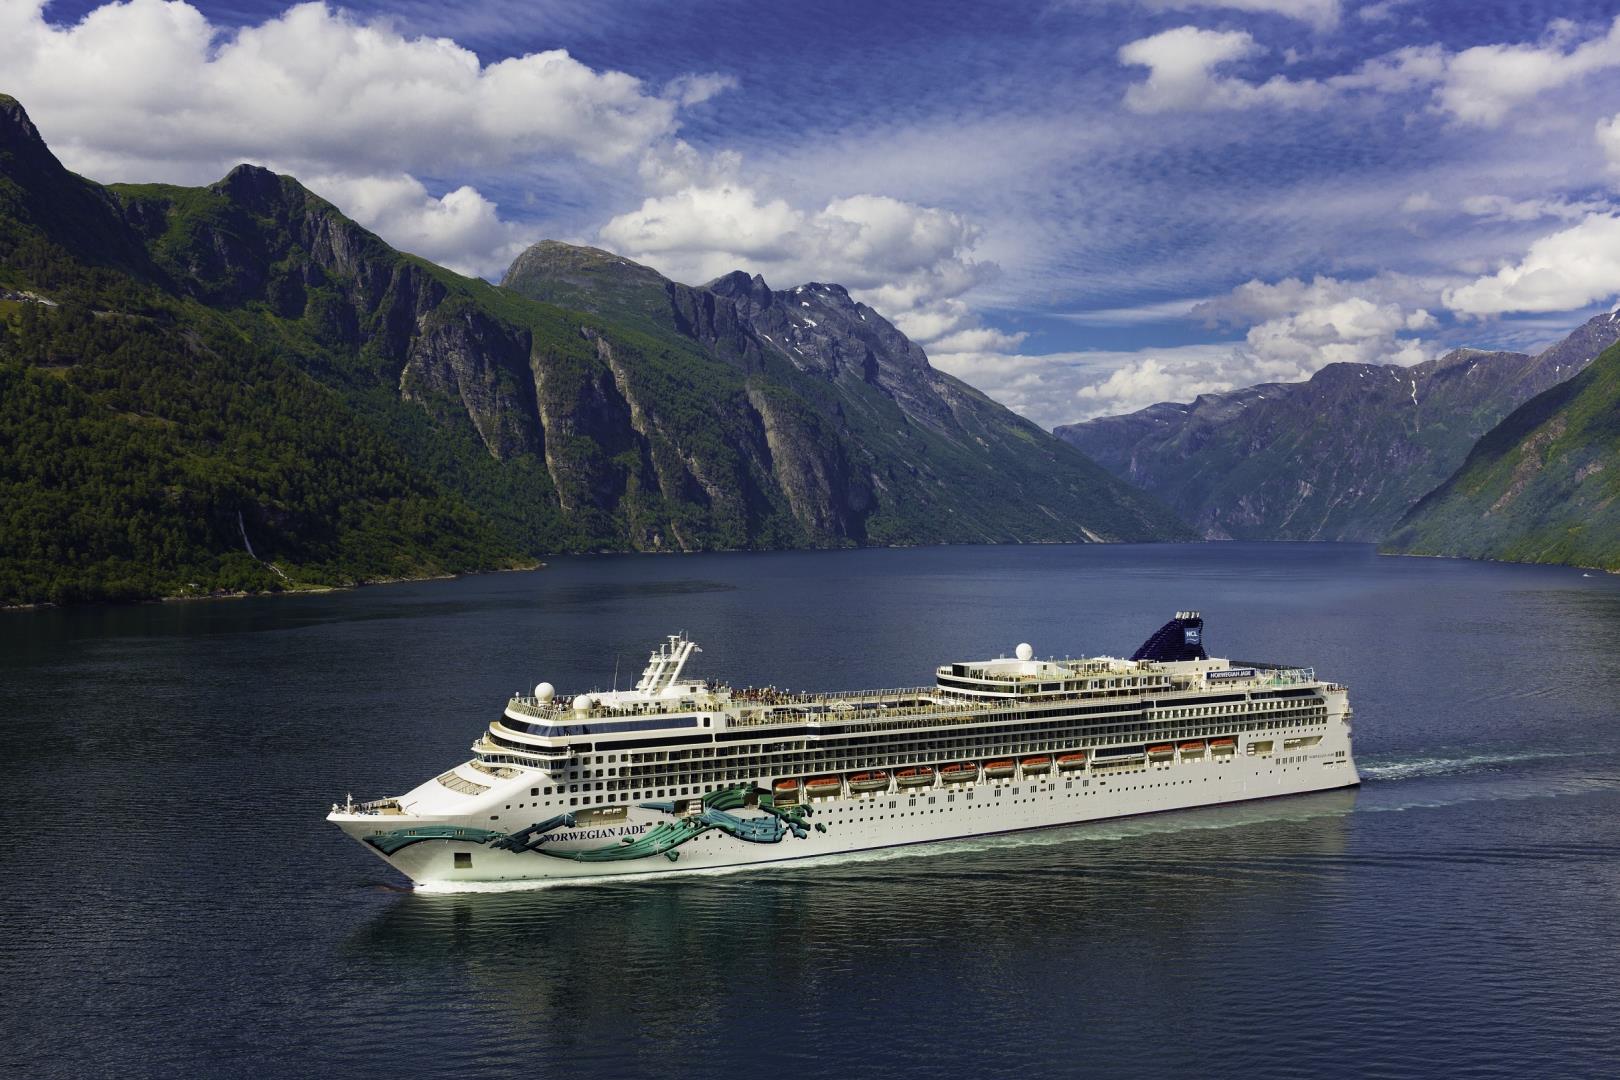 8-day Cruise to from San Diego, California on Norwegian Jade